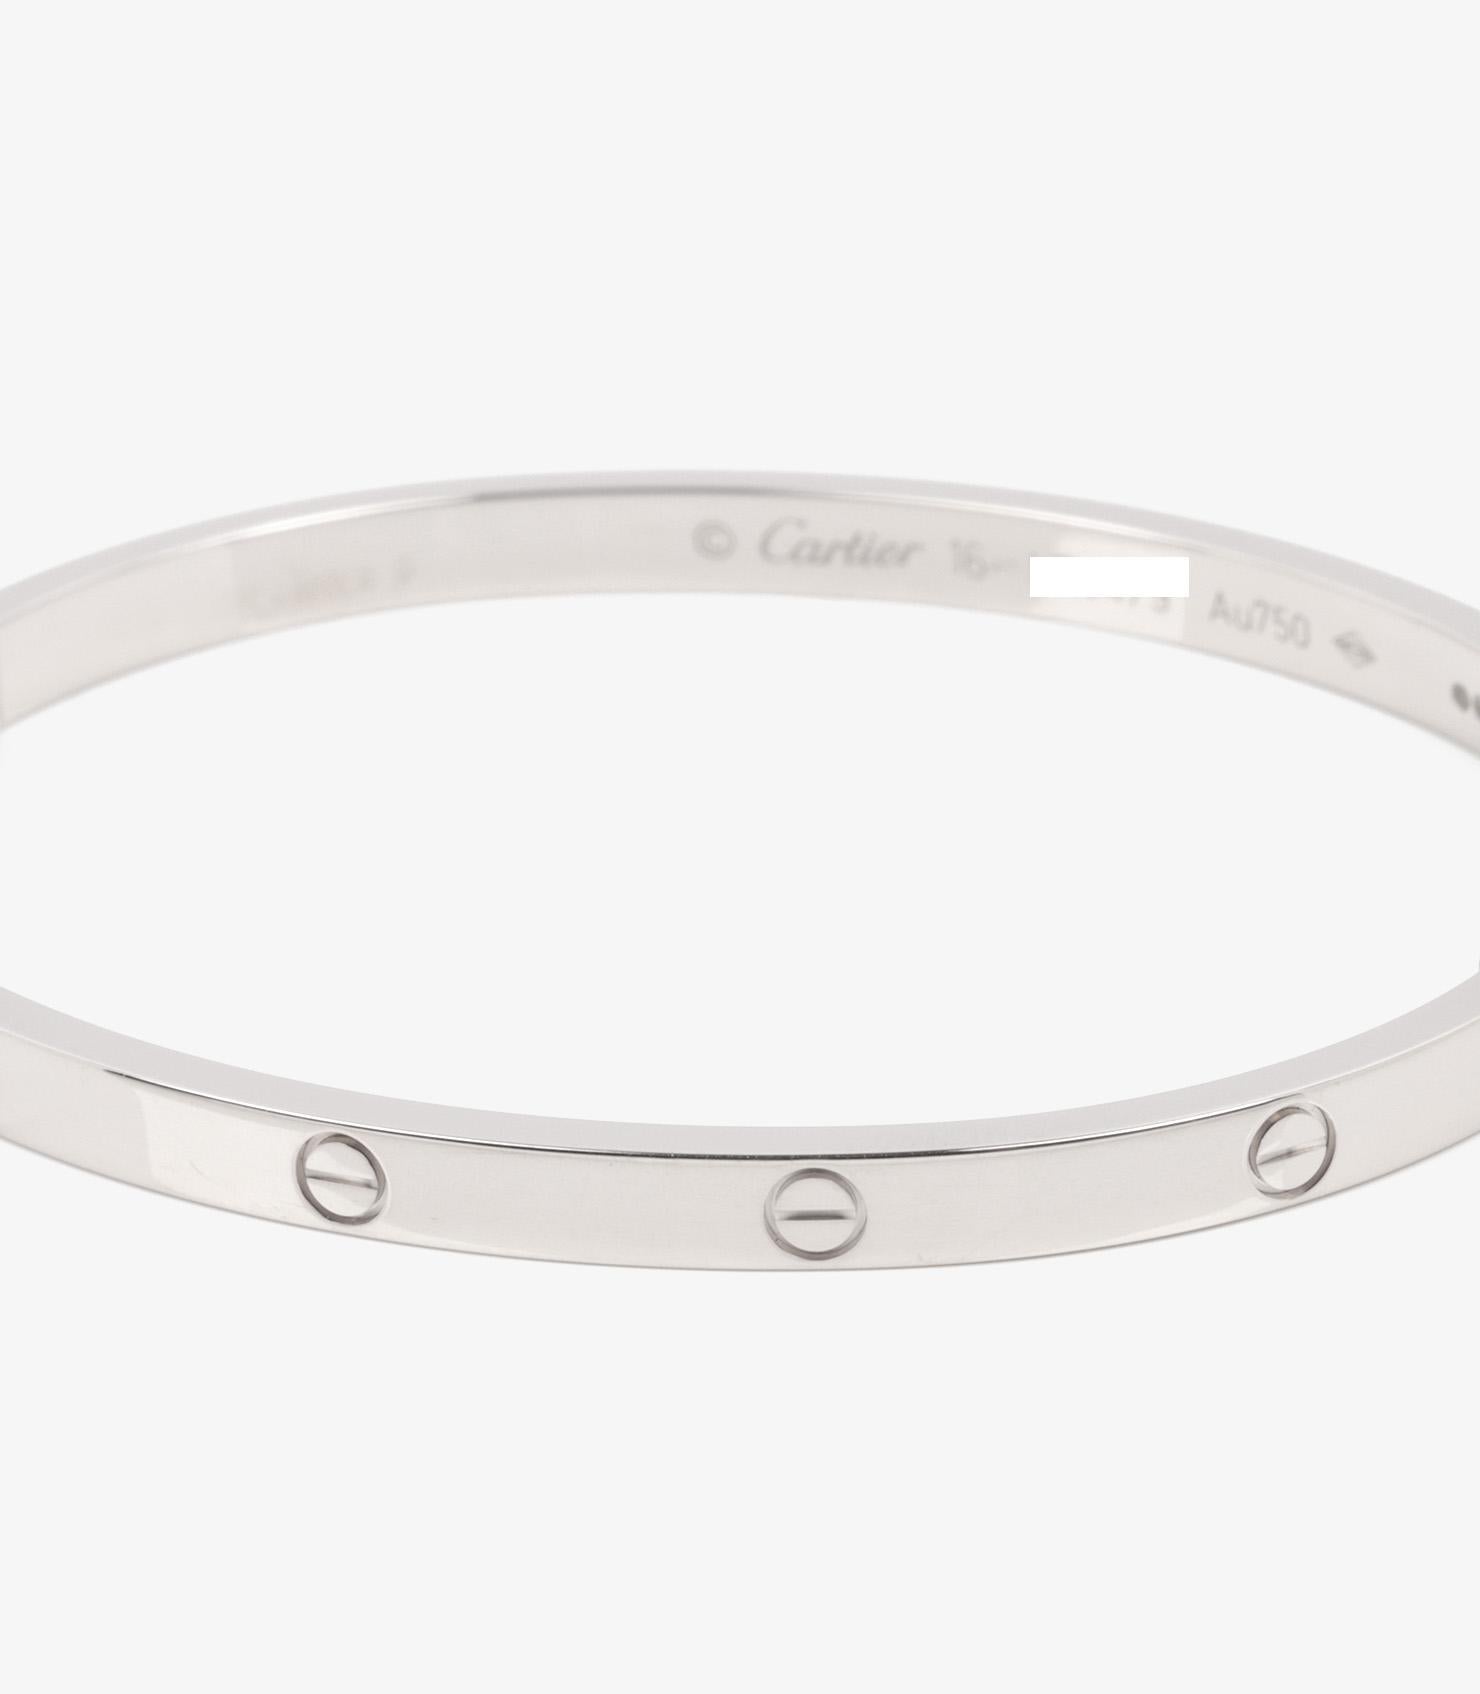 Cartier 18ct White Gold Love SM Bangle

Brand- Cartier
Model- Love SM Bangle
Product Type- Bracelet
Serial Number- LR****
Age- Circa 2021
Accompanied By- Cartier Pouch, Certificate, Screwdriver
Material(s)- 18ct White Gold

Bracelet Length-